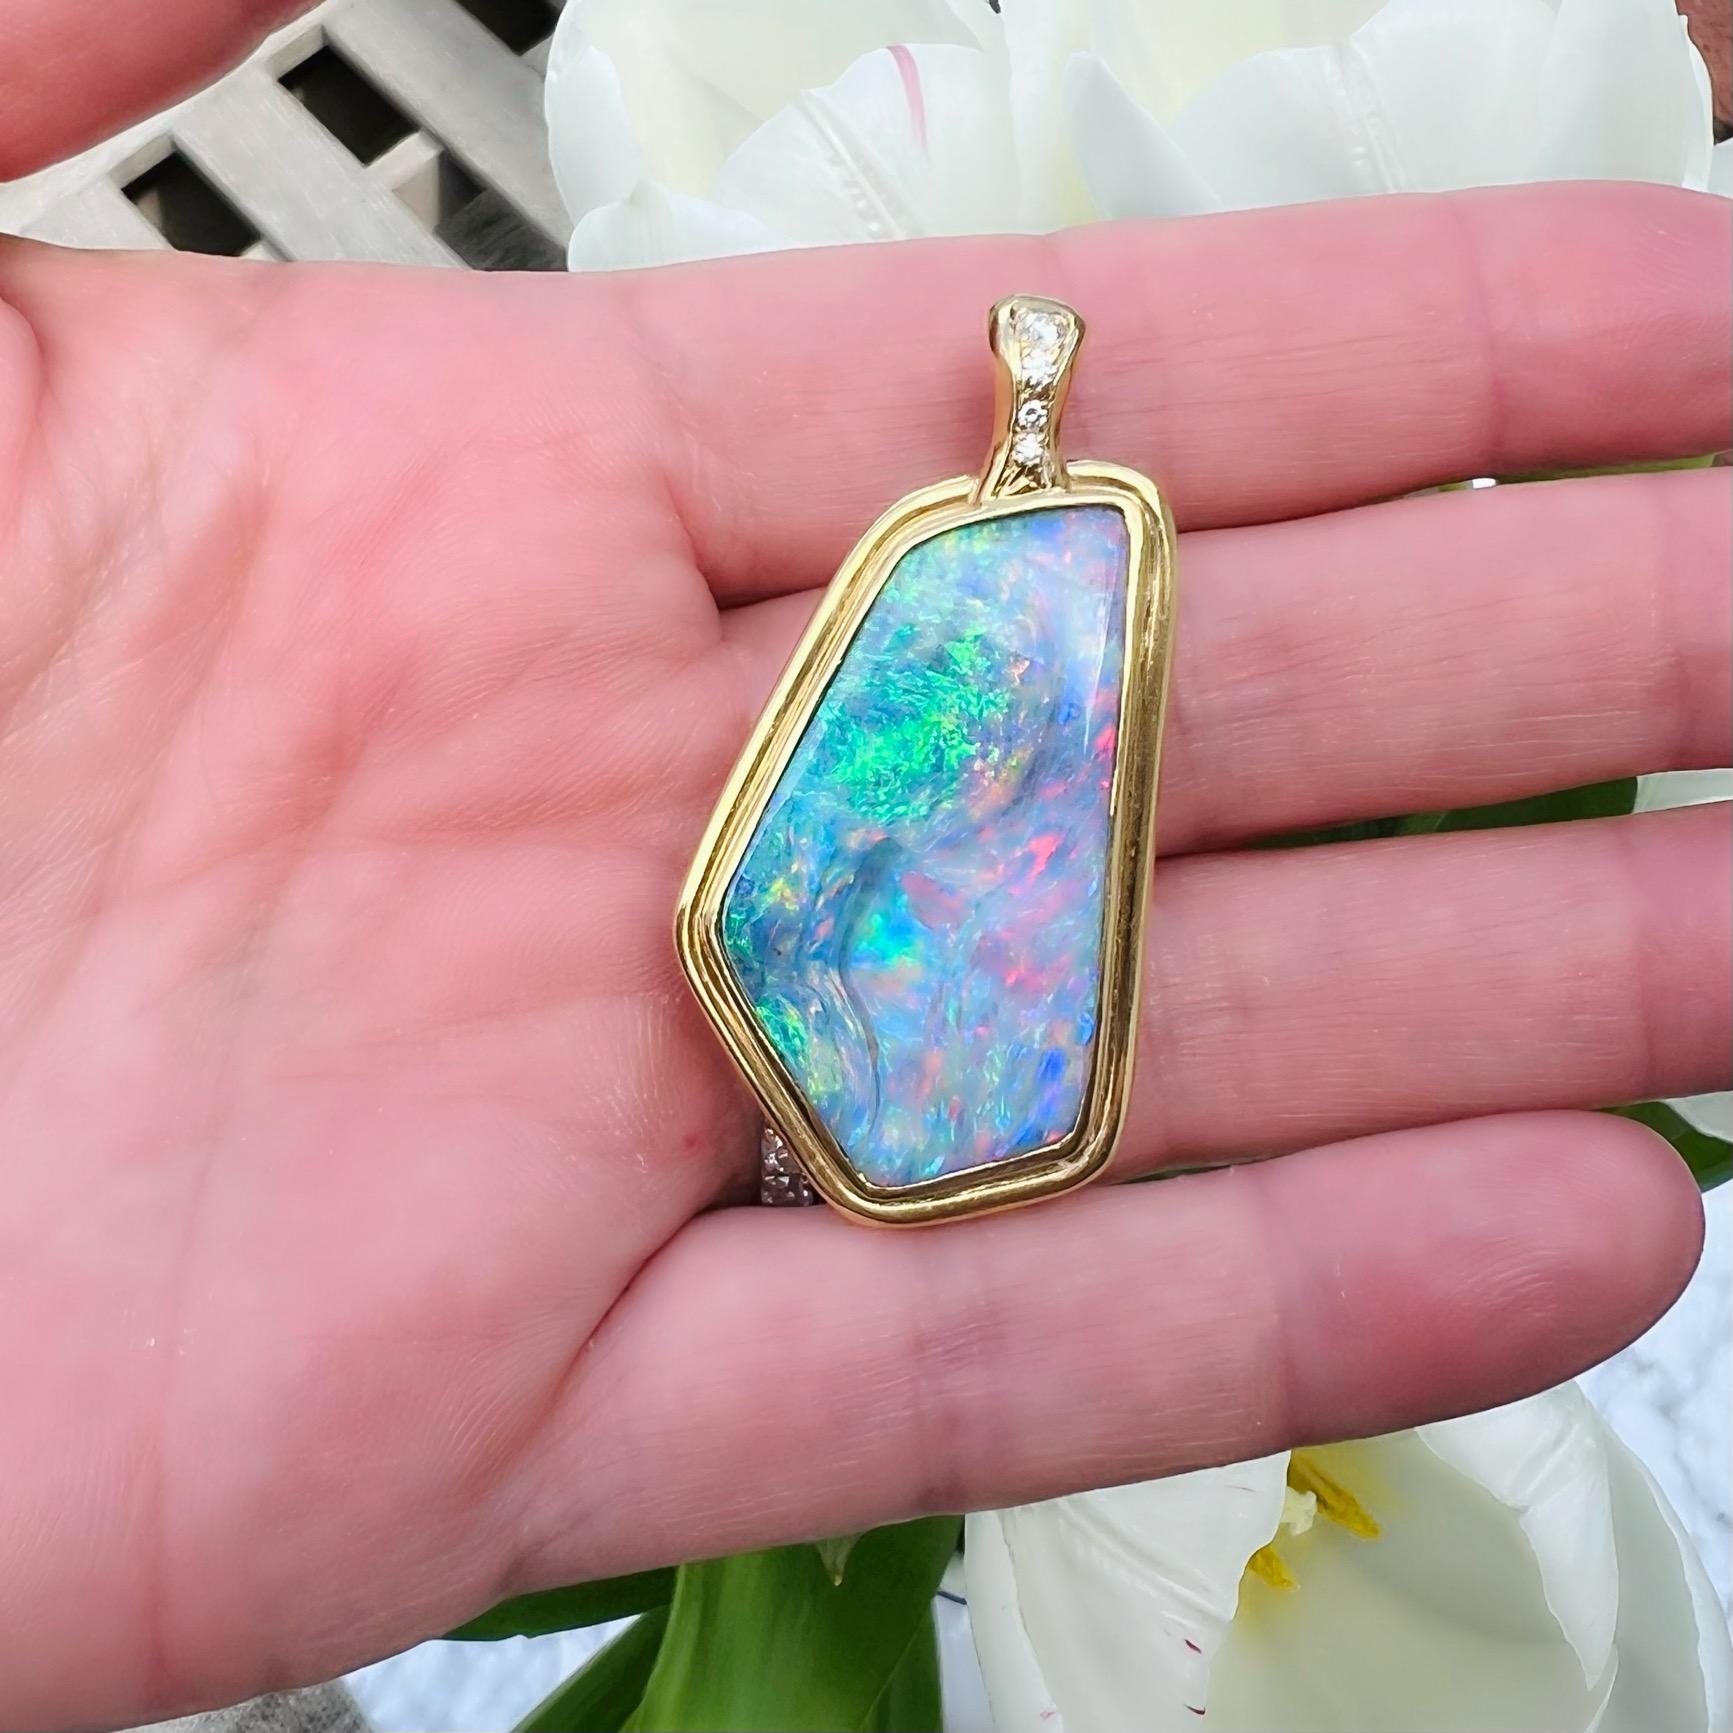 Flashes of color to take your breath away! This 18 karat yellow gold pendant features a stunning Australian boulder opal that displays incredible flashes of pinks, greens, lavenders and blues throughout. The bale of the pendant features 4 extremely